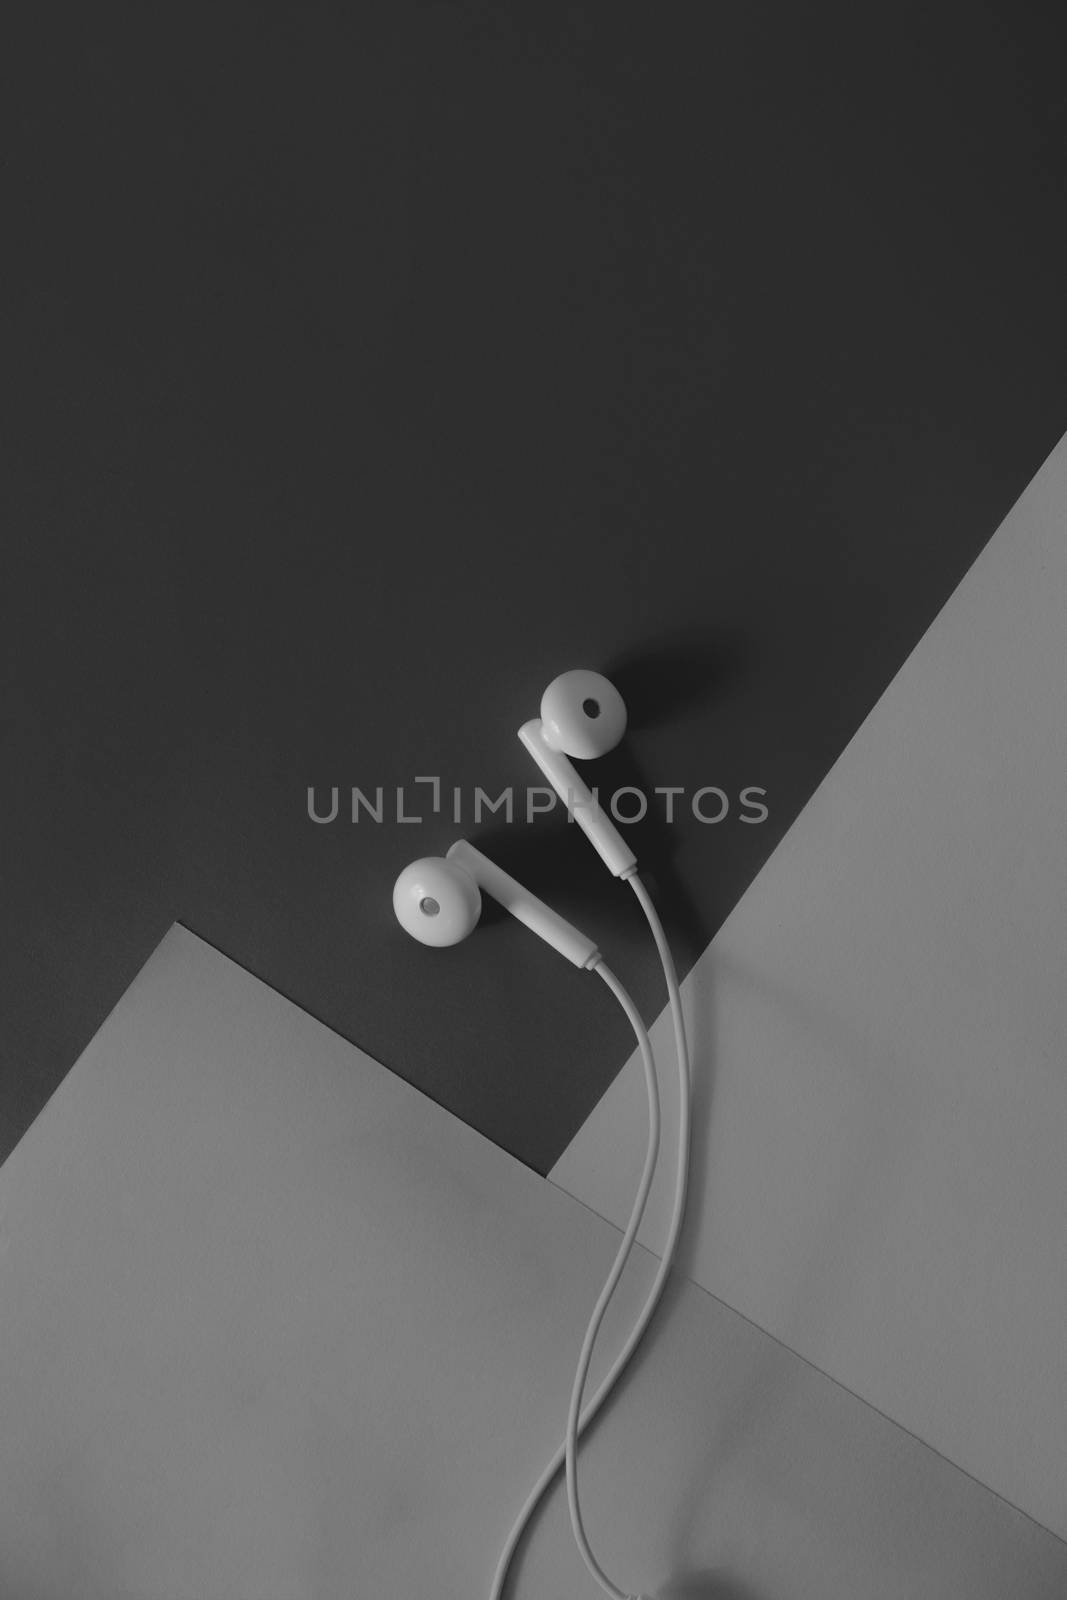 pair of in-ear headphones on dark black and white background by photoboyko